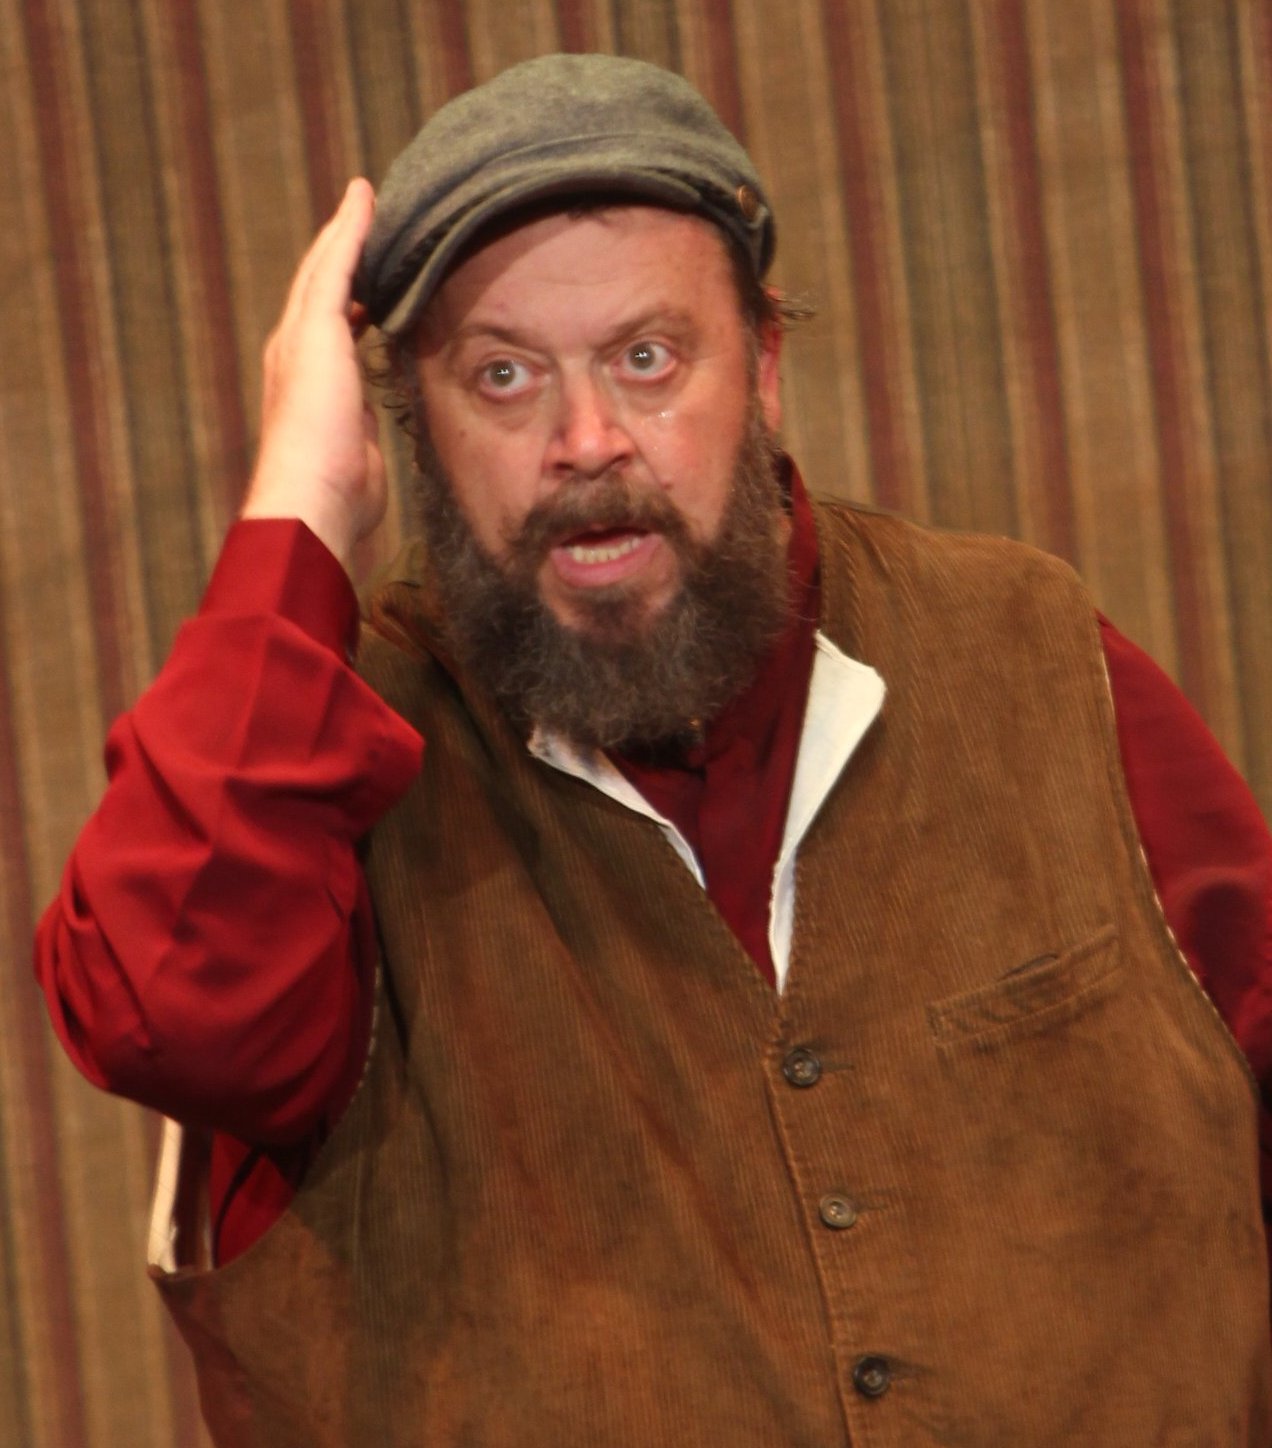 Christopher Chisholm as Tevye in Fiddler on the Roof